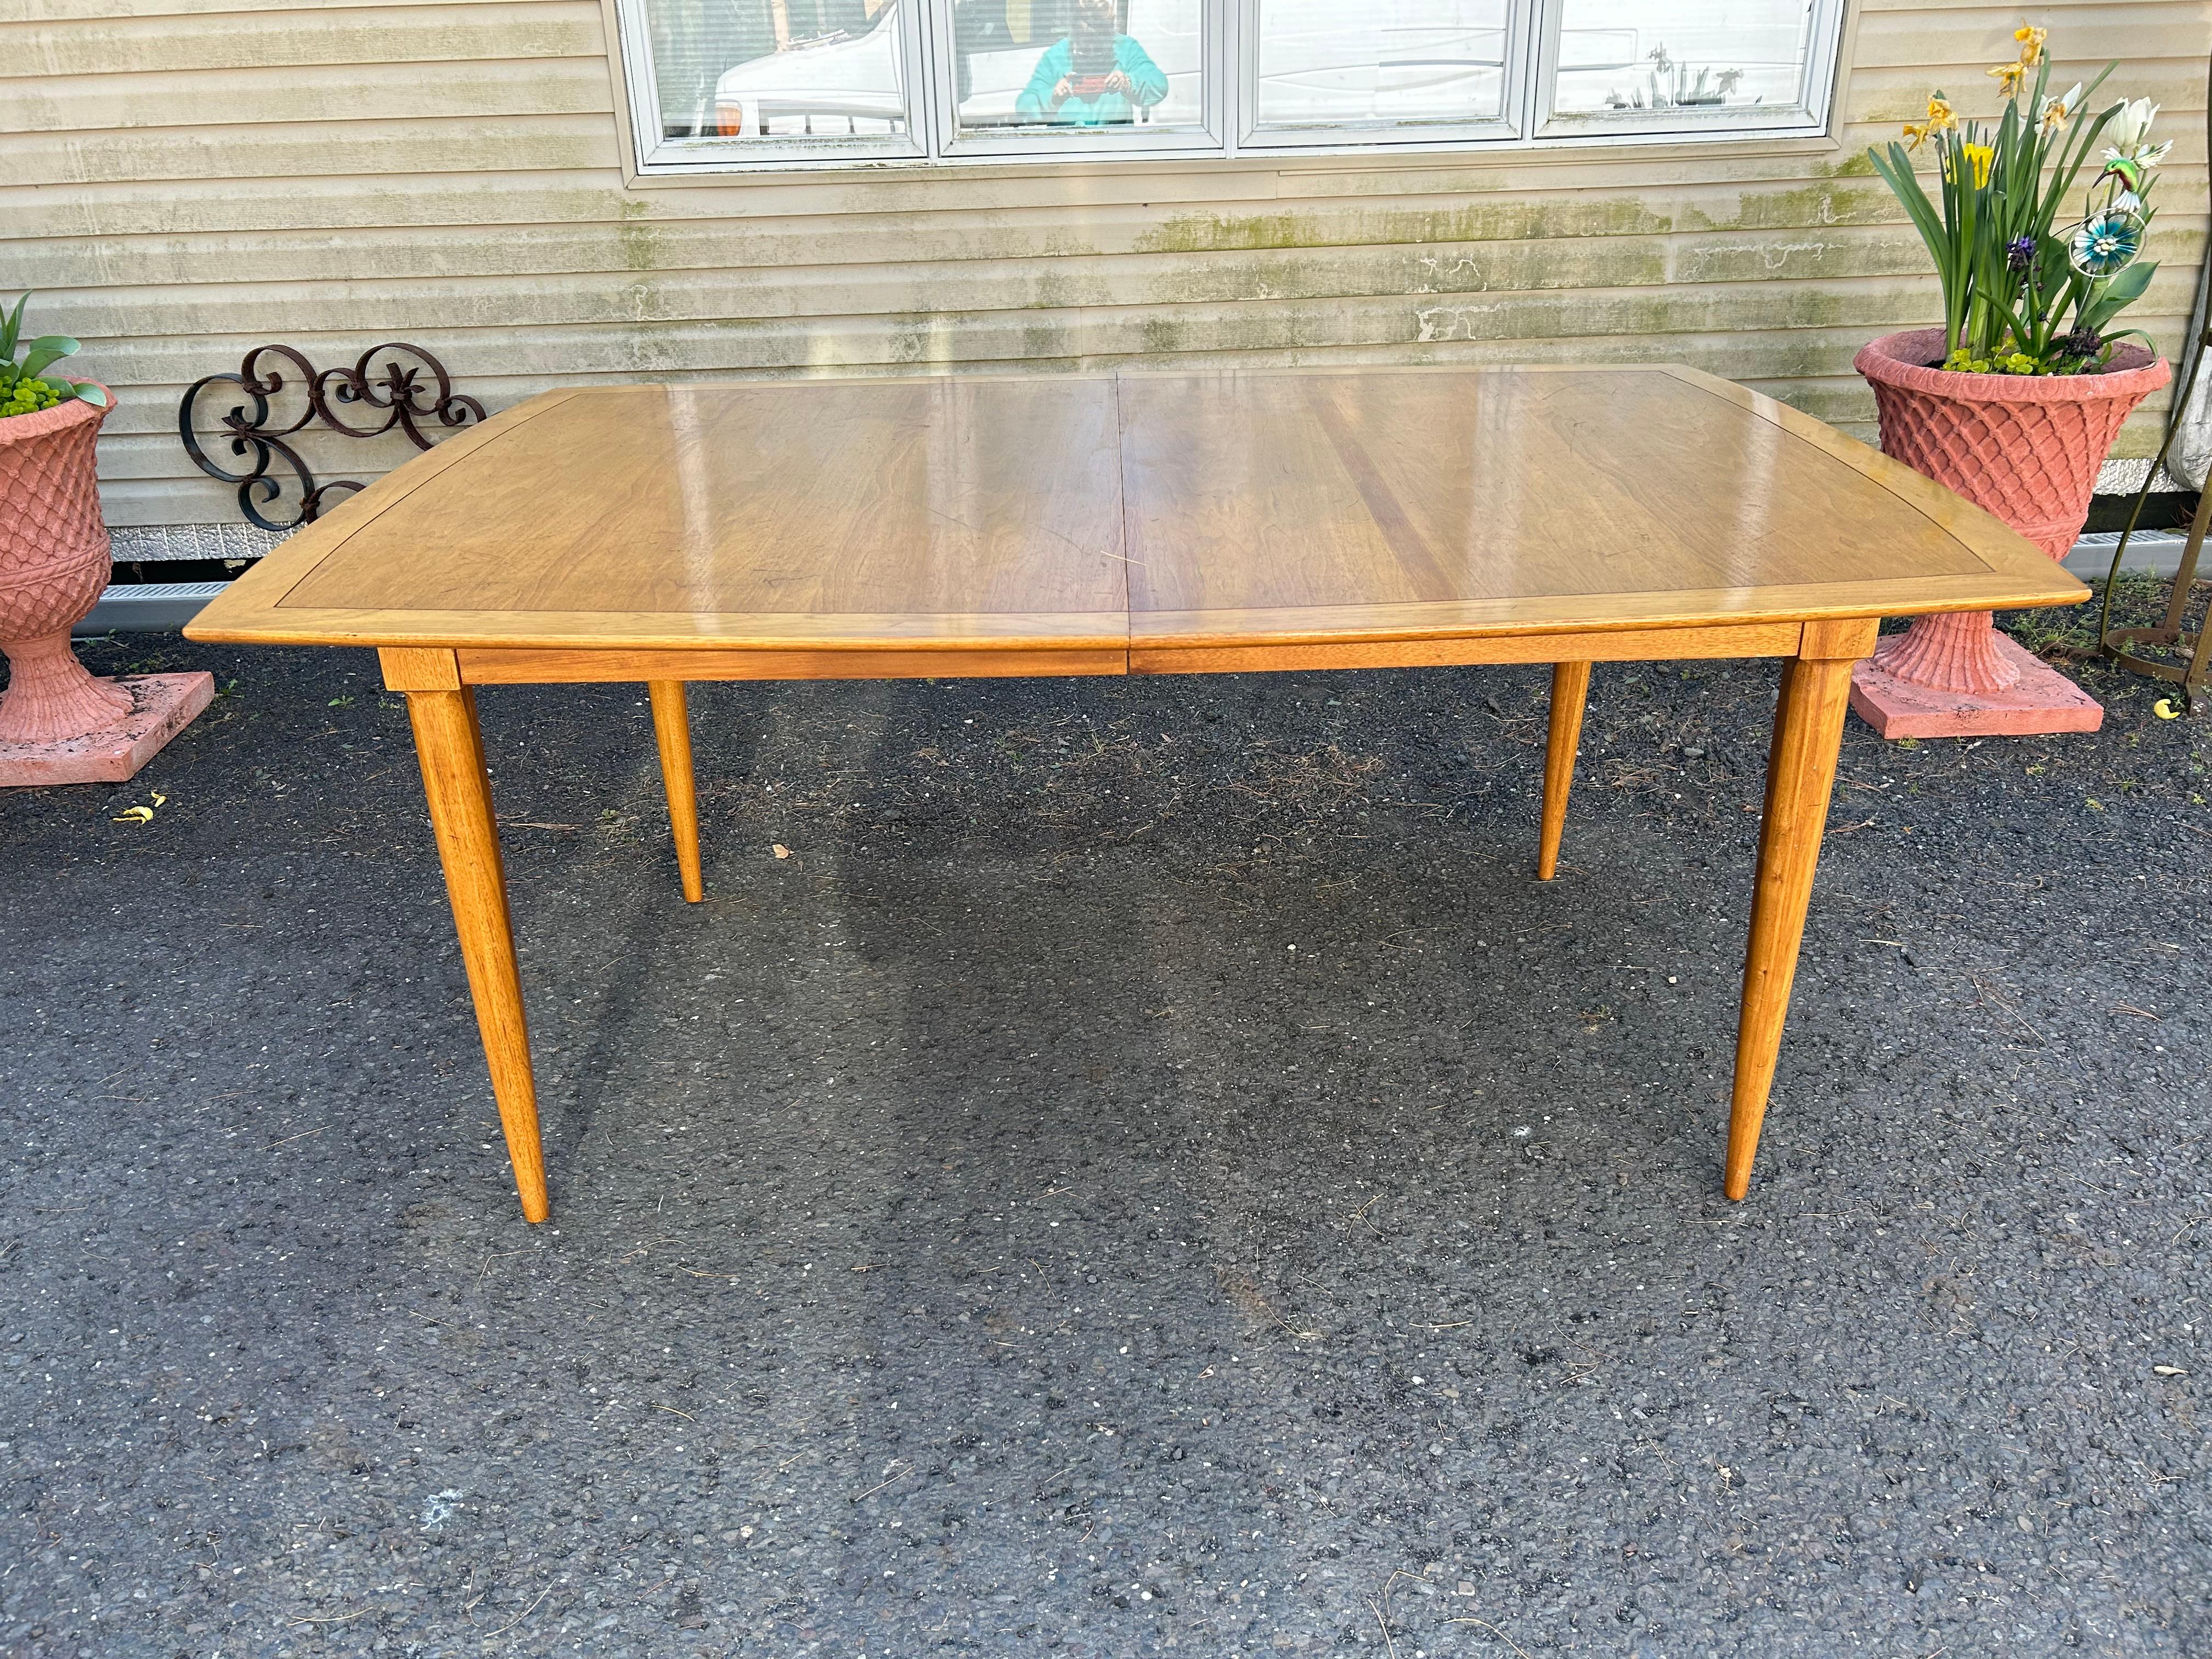 Gorgeous Tomlinson Sophisticate dining room table from the 1950's.  We just love all the pieces from the early 